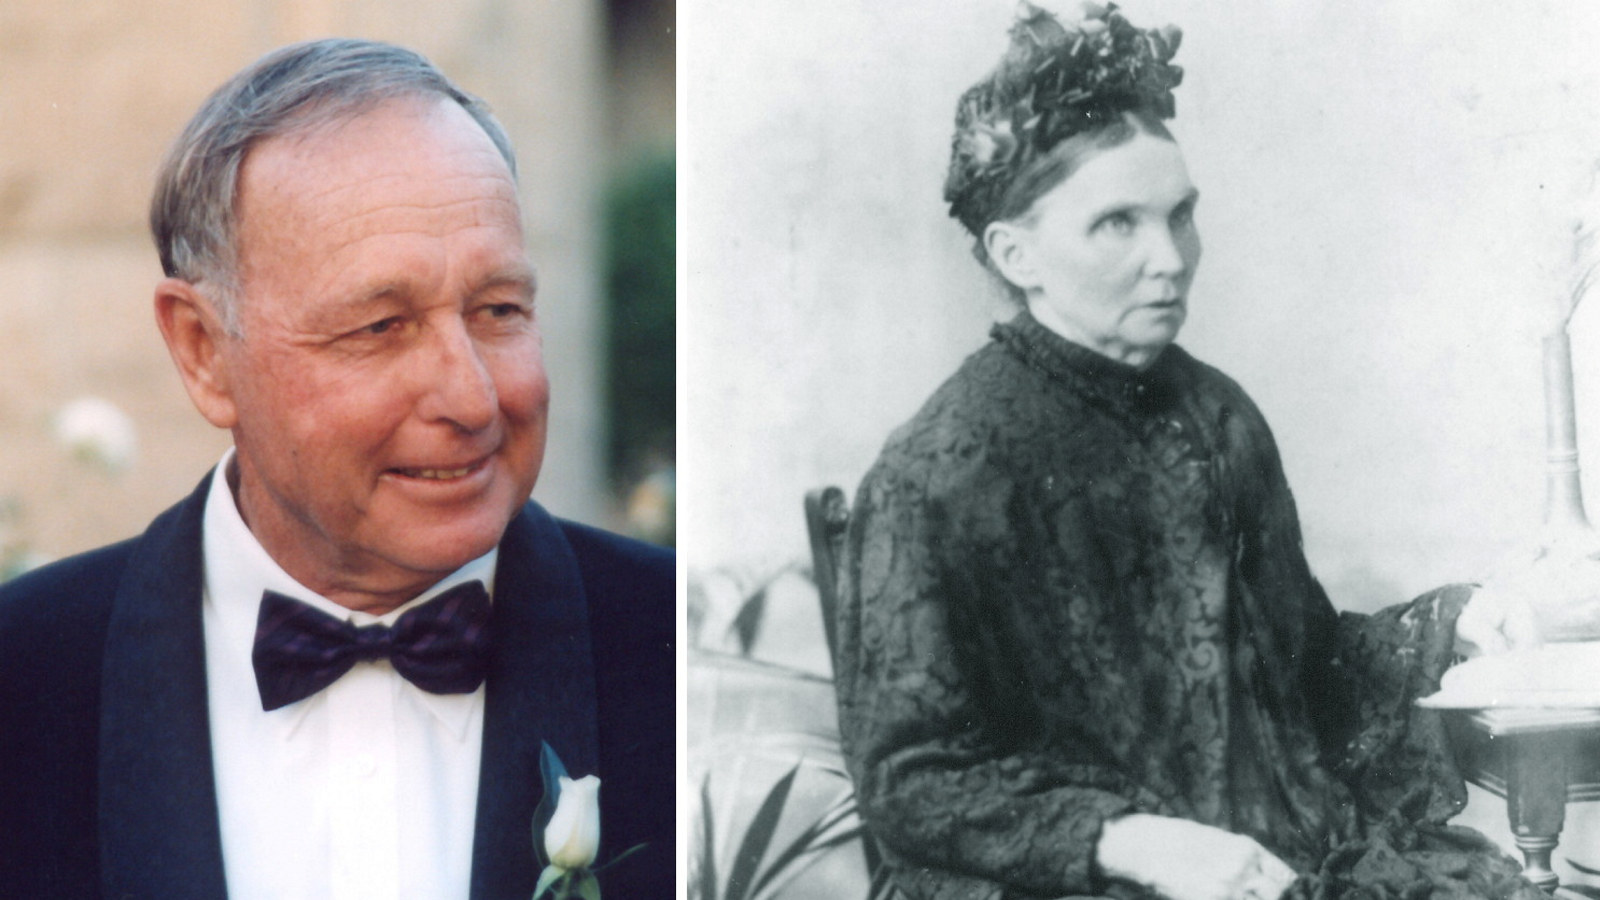 Combined photo portrait featuring contemporary image of man tuxedo and historic photo of woman seated, wearing formal black buttoned up dress and hat.